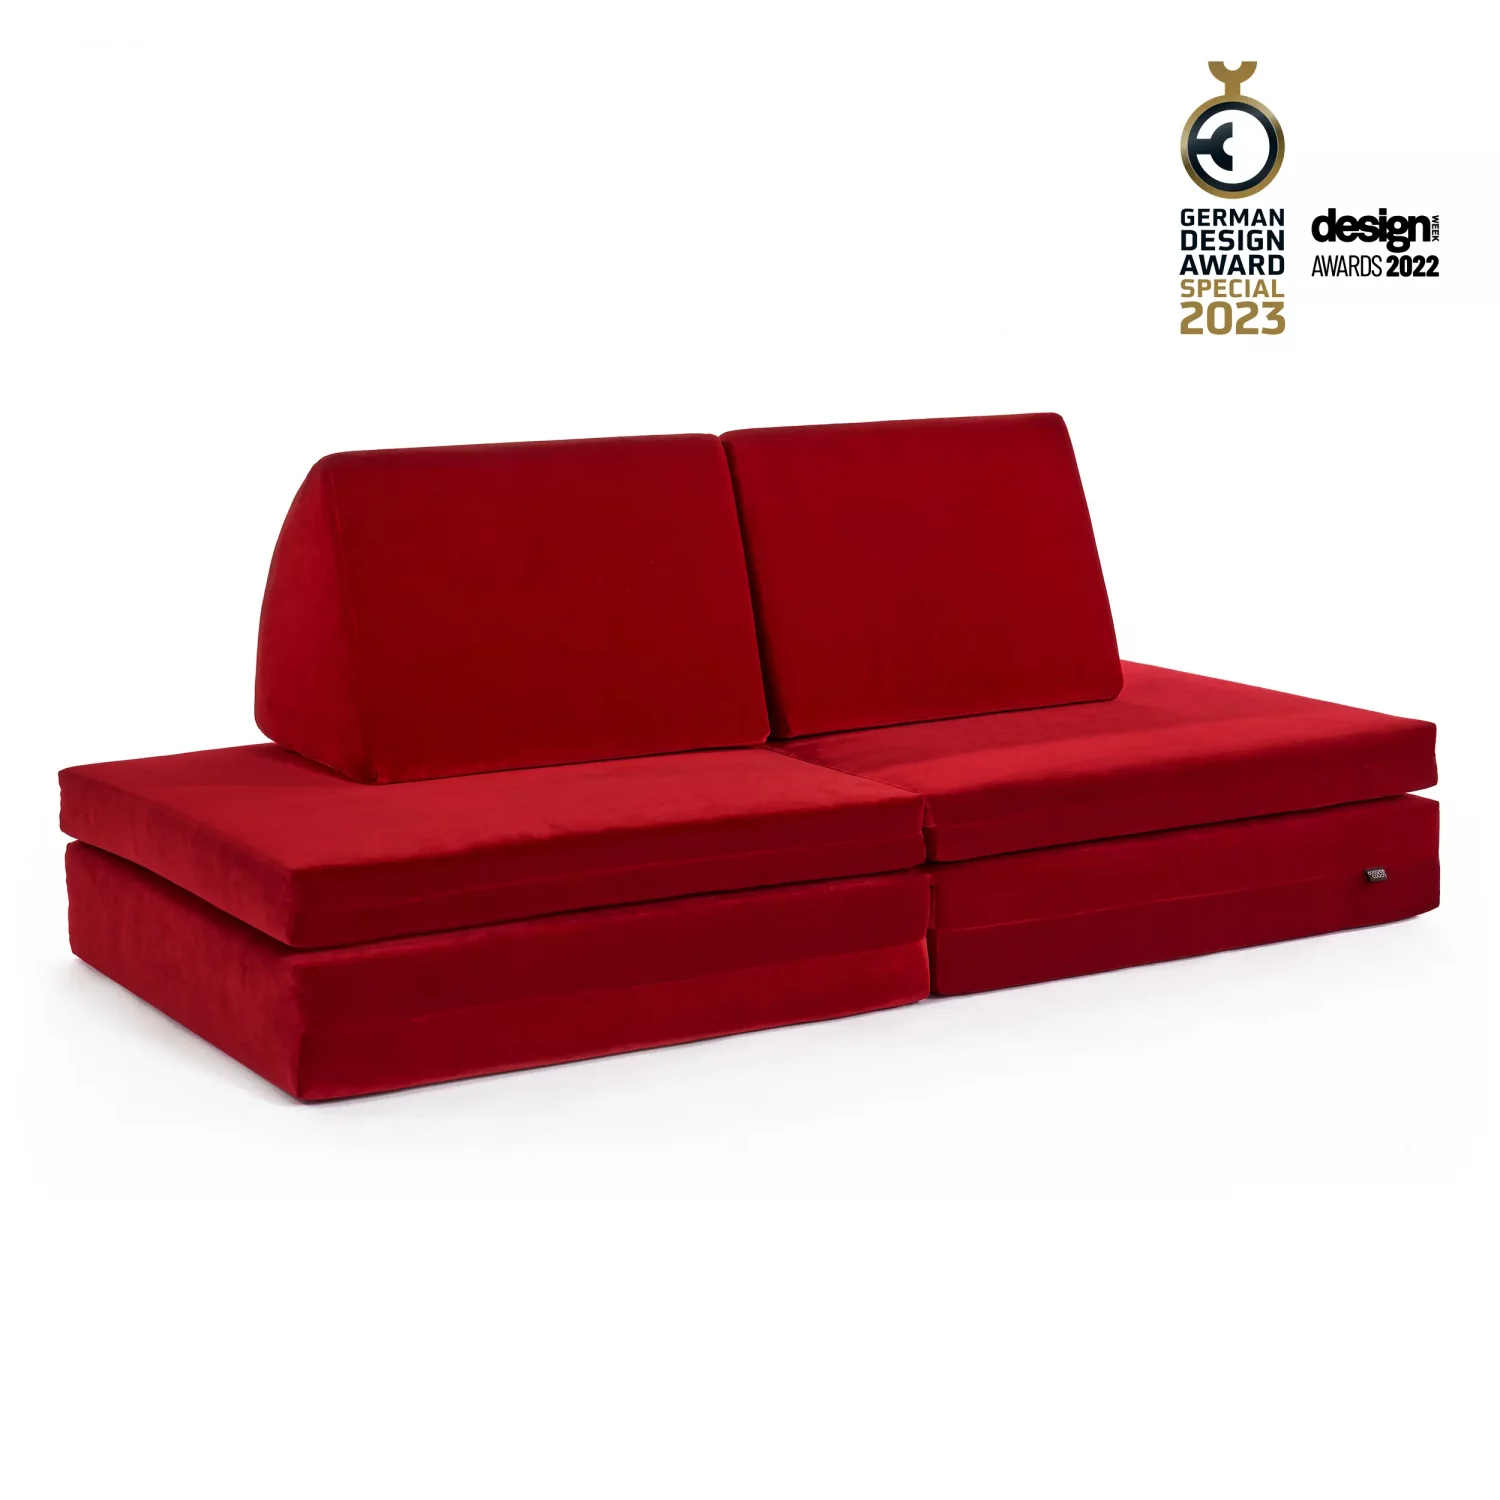 coogeecouch | Award | German Design Award 2023  | Kindersofa | Serie: scuderia-fantasia | Farbe: chilli-red hellrot | Ansicht: Front schräg | made in Germany